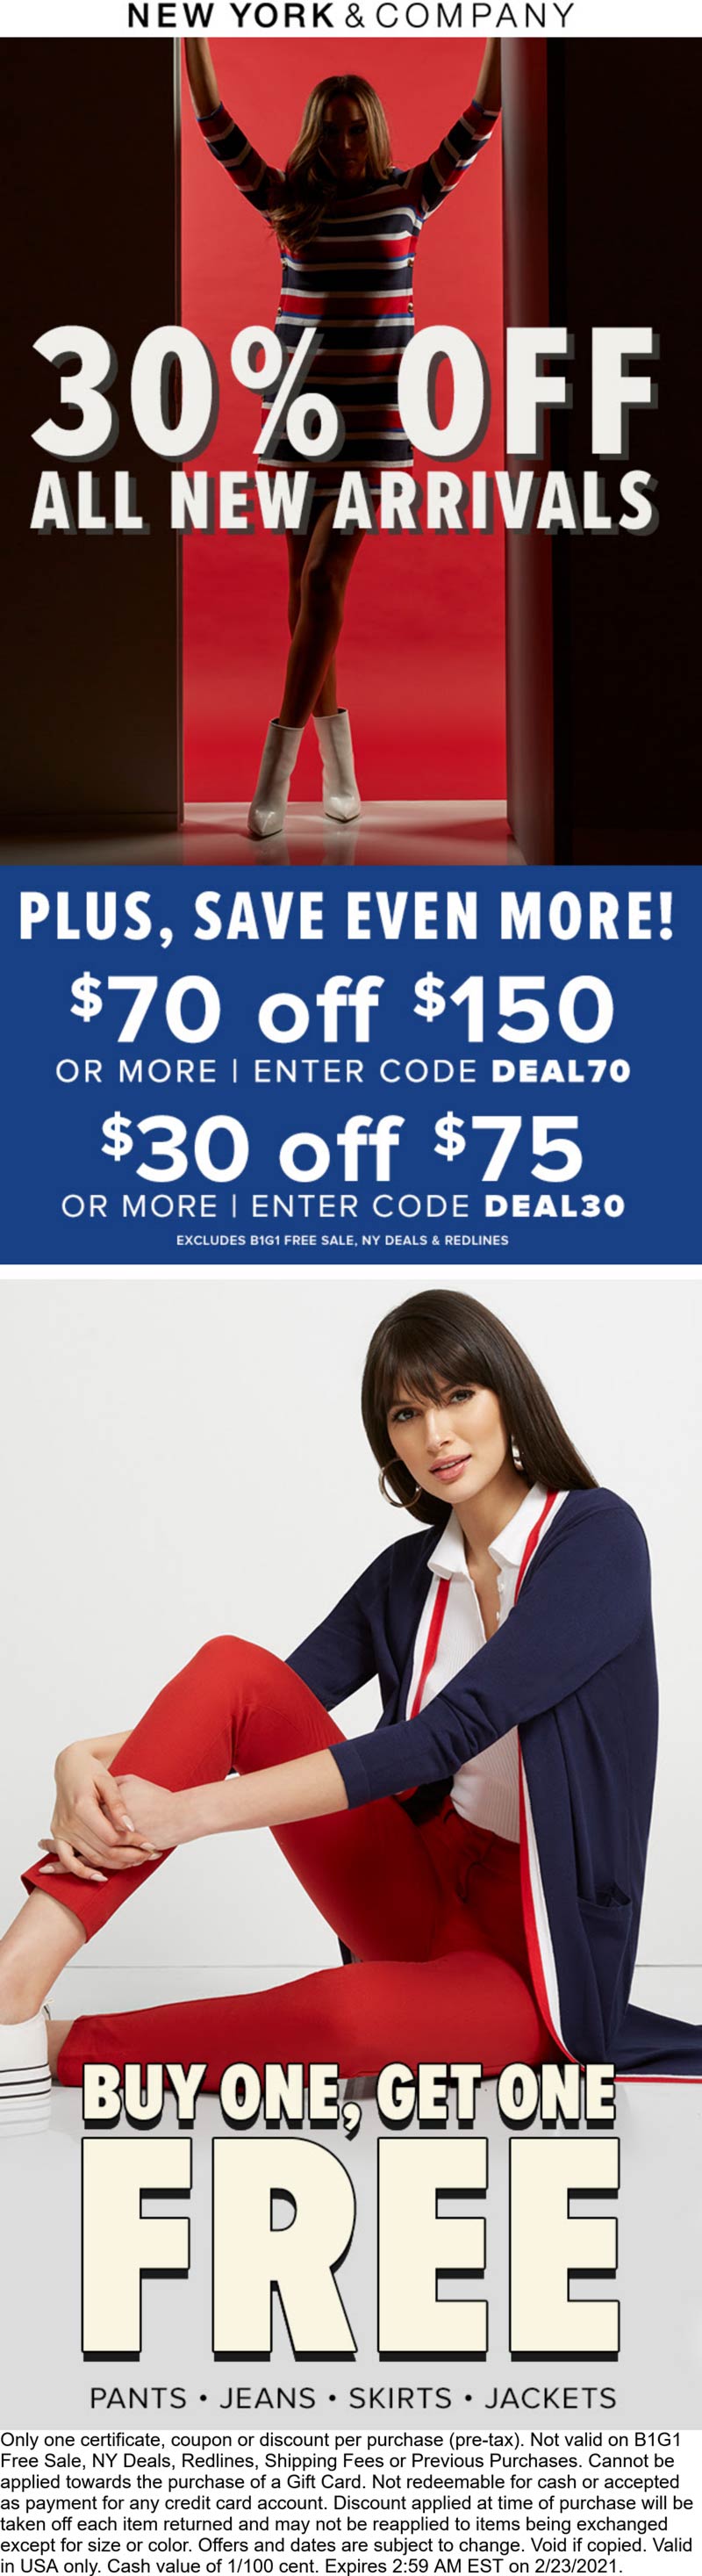 Second item free & more today at New York & Company via promo code